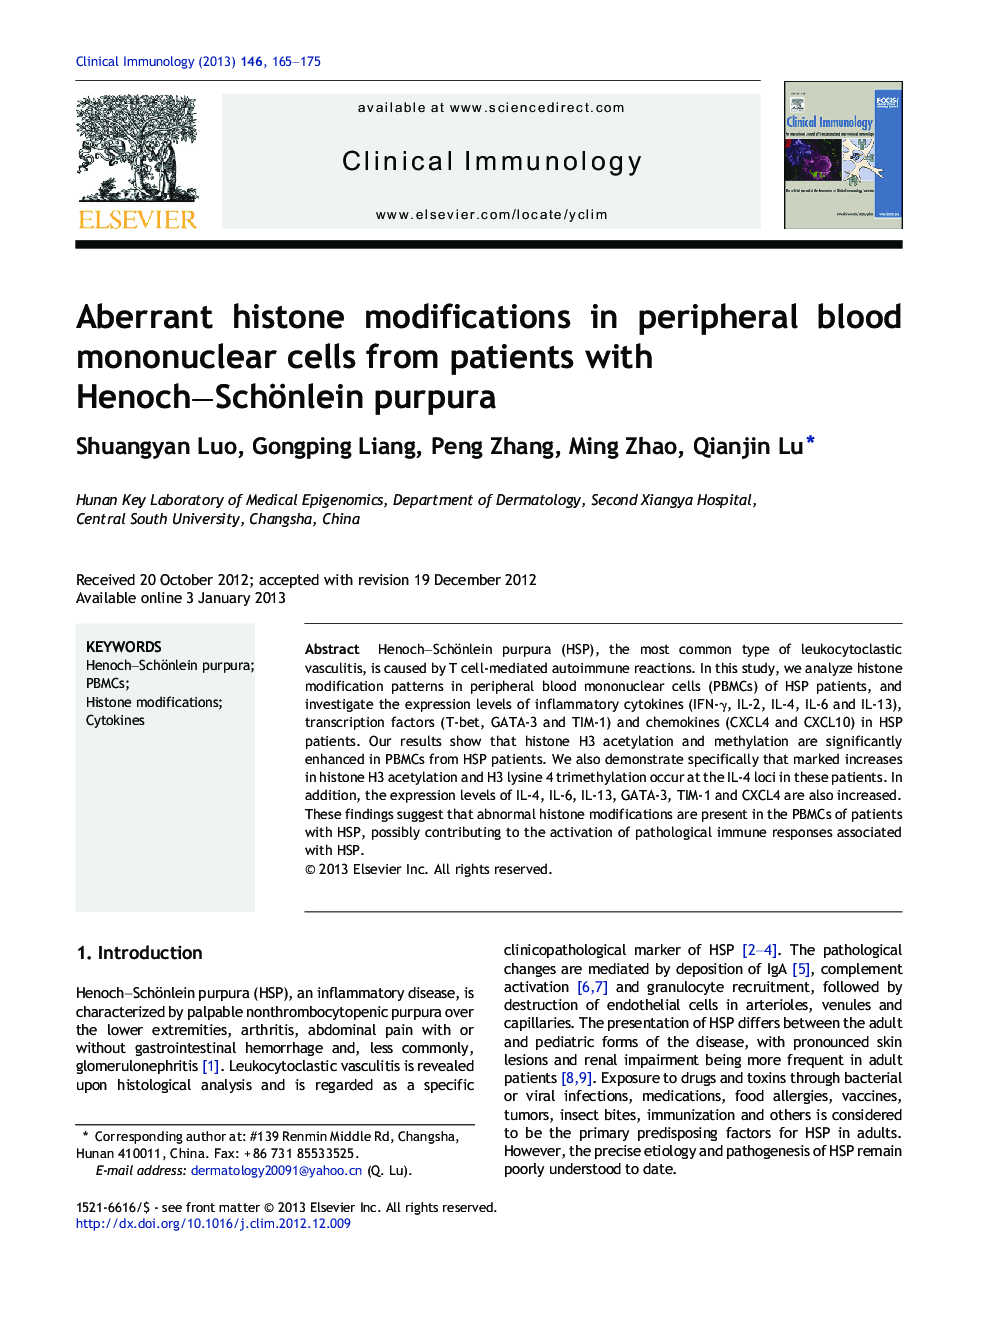 Aberrant histone modifications in peripheral blood mononuclear cells from patients with Henoch-Schönlein purpura